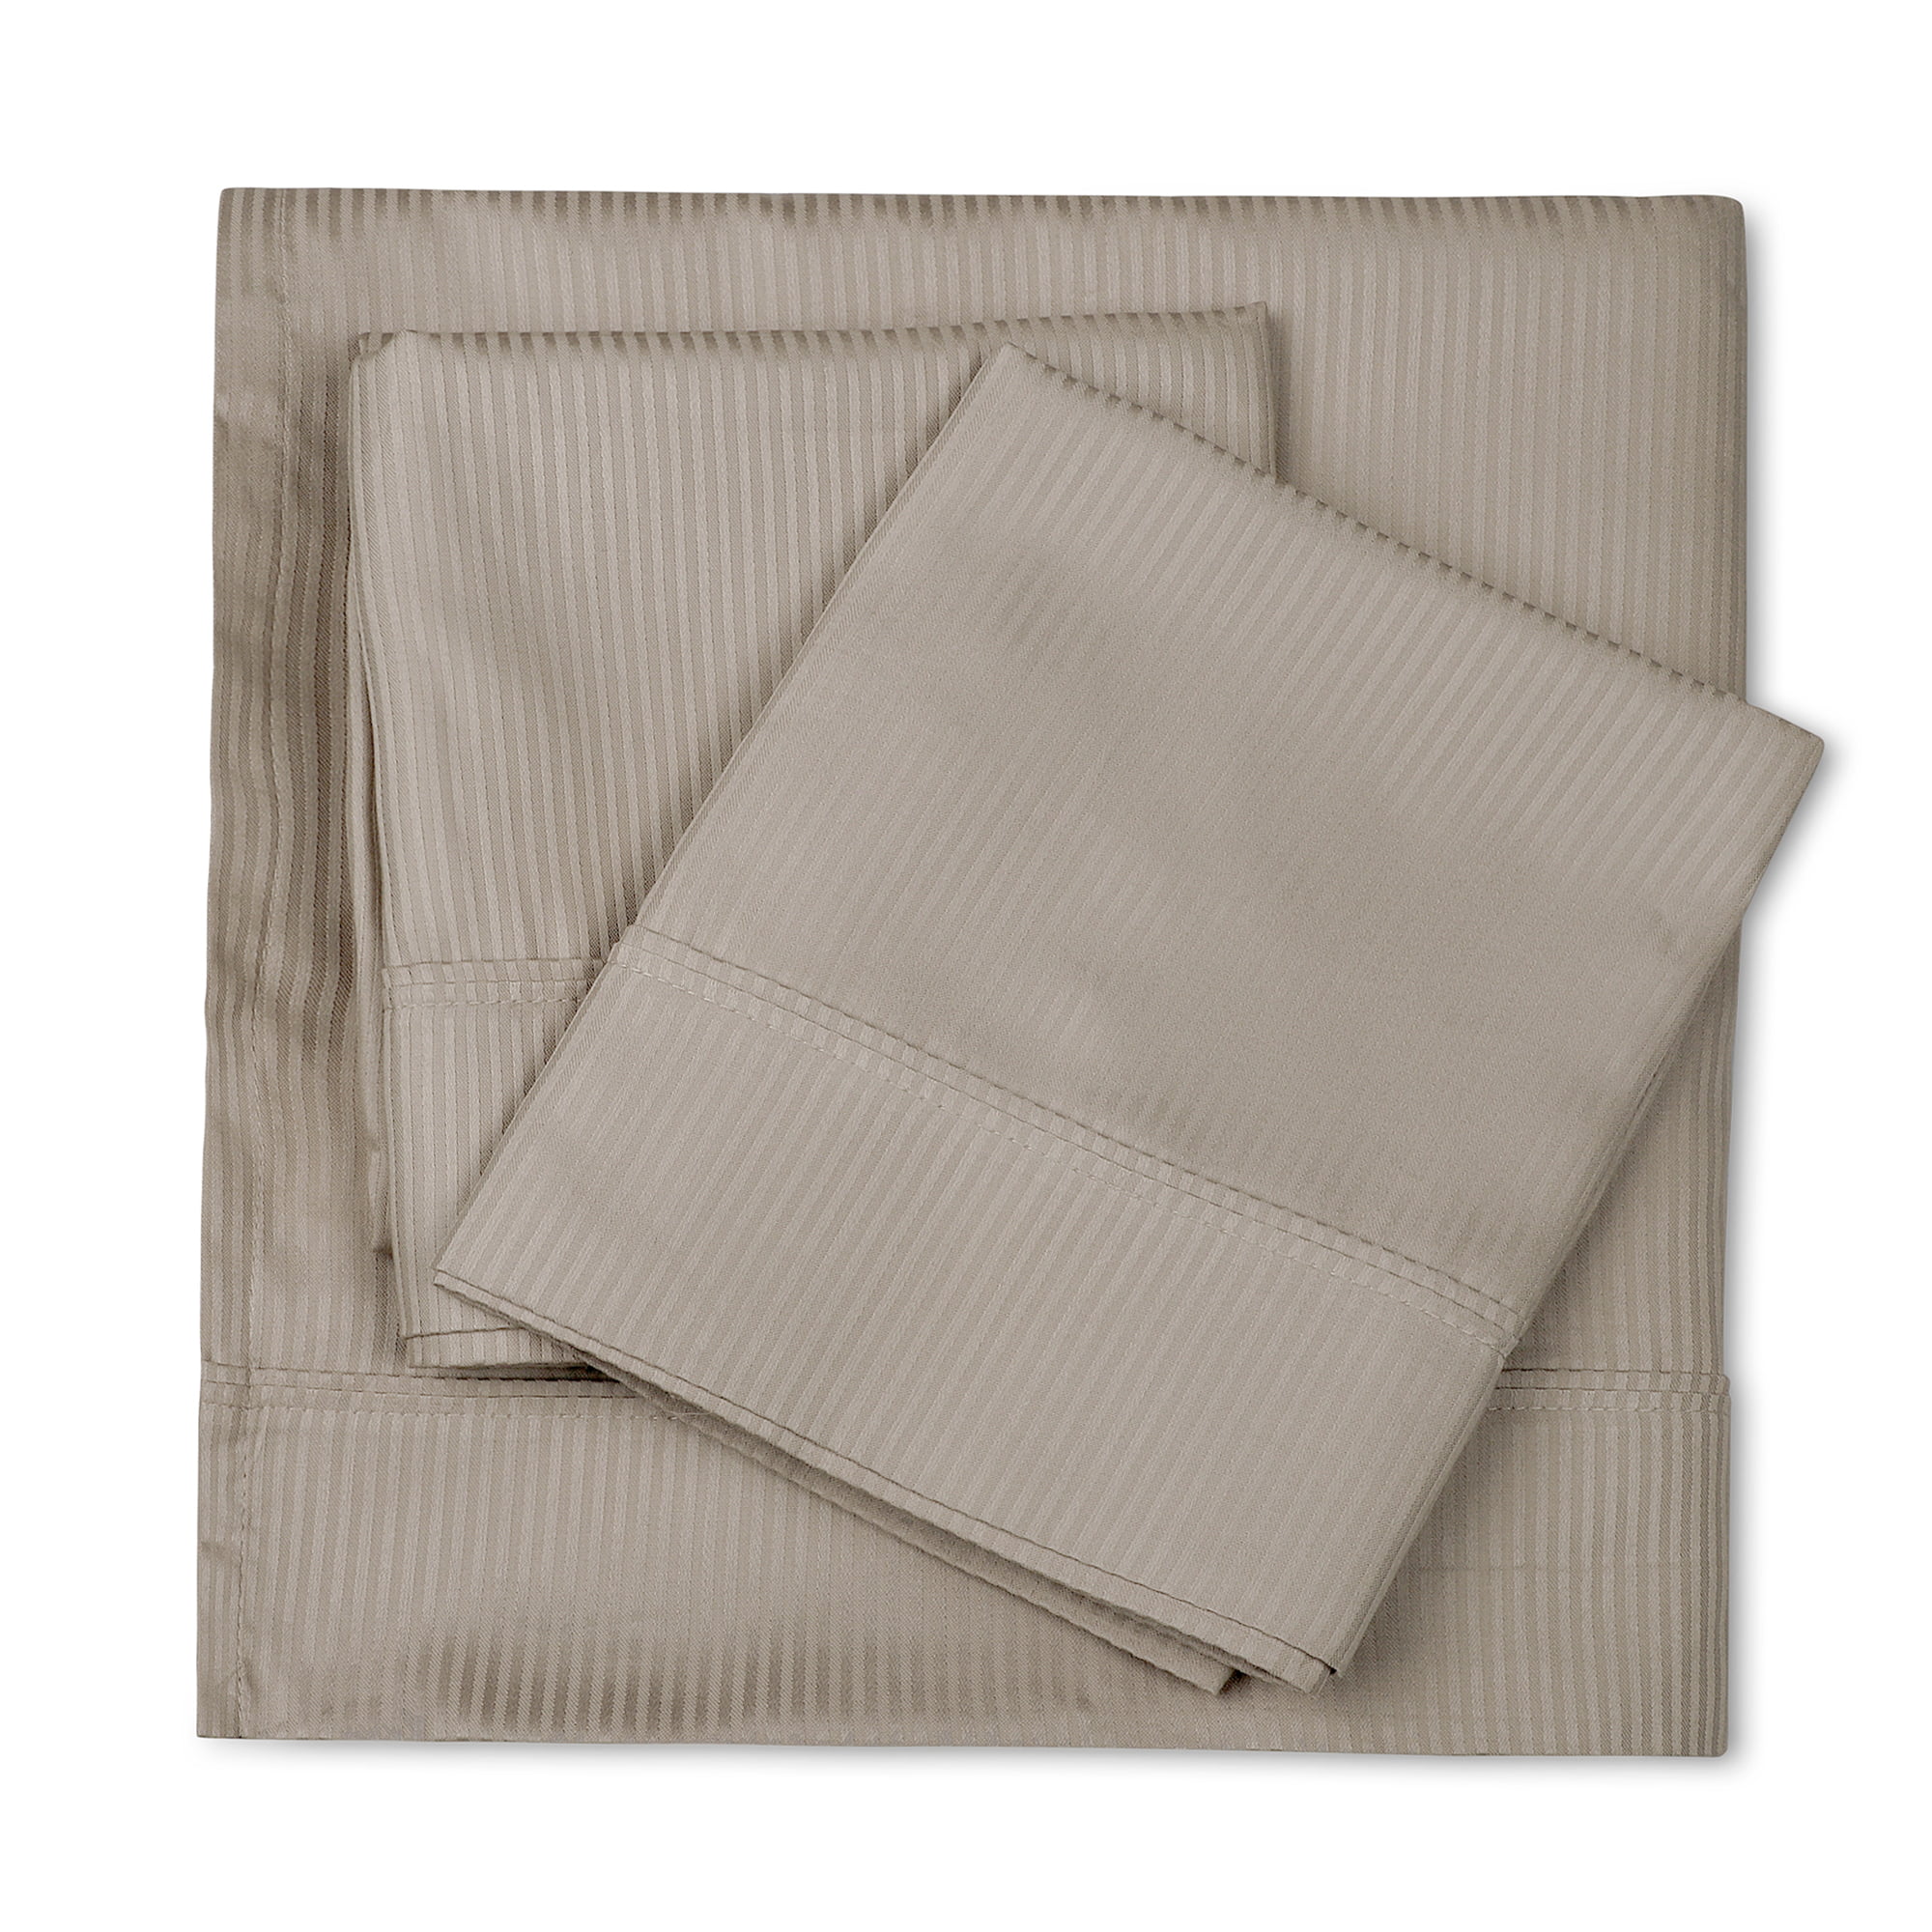 Trivana Pillowcases TRIDENT 2 Pillowcovers 300TC Oeko-TEX Certified Soft & Smooth Percale Weave 100% Fine Quality Cotton Wet Weather